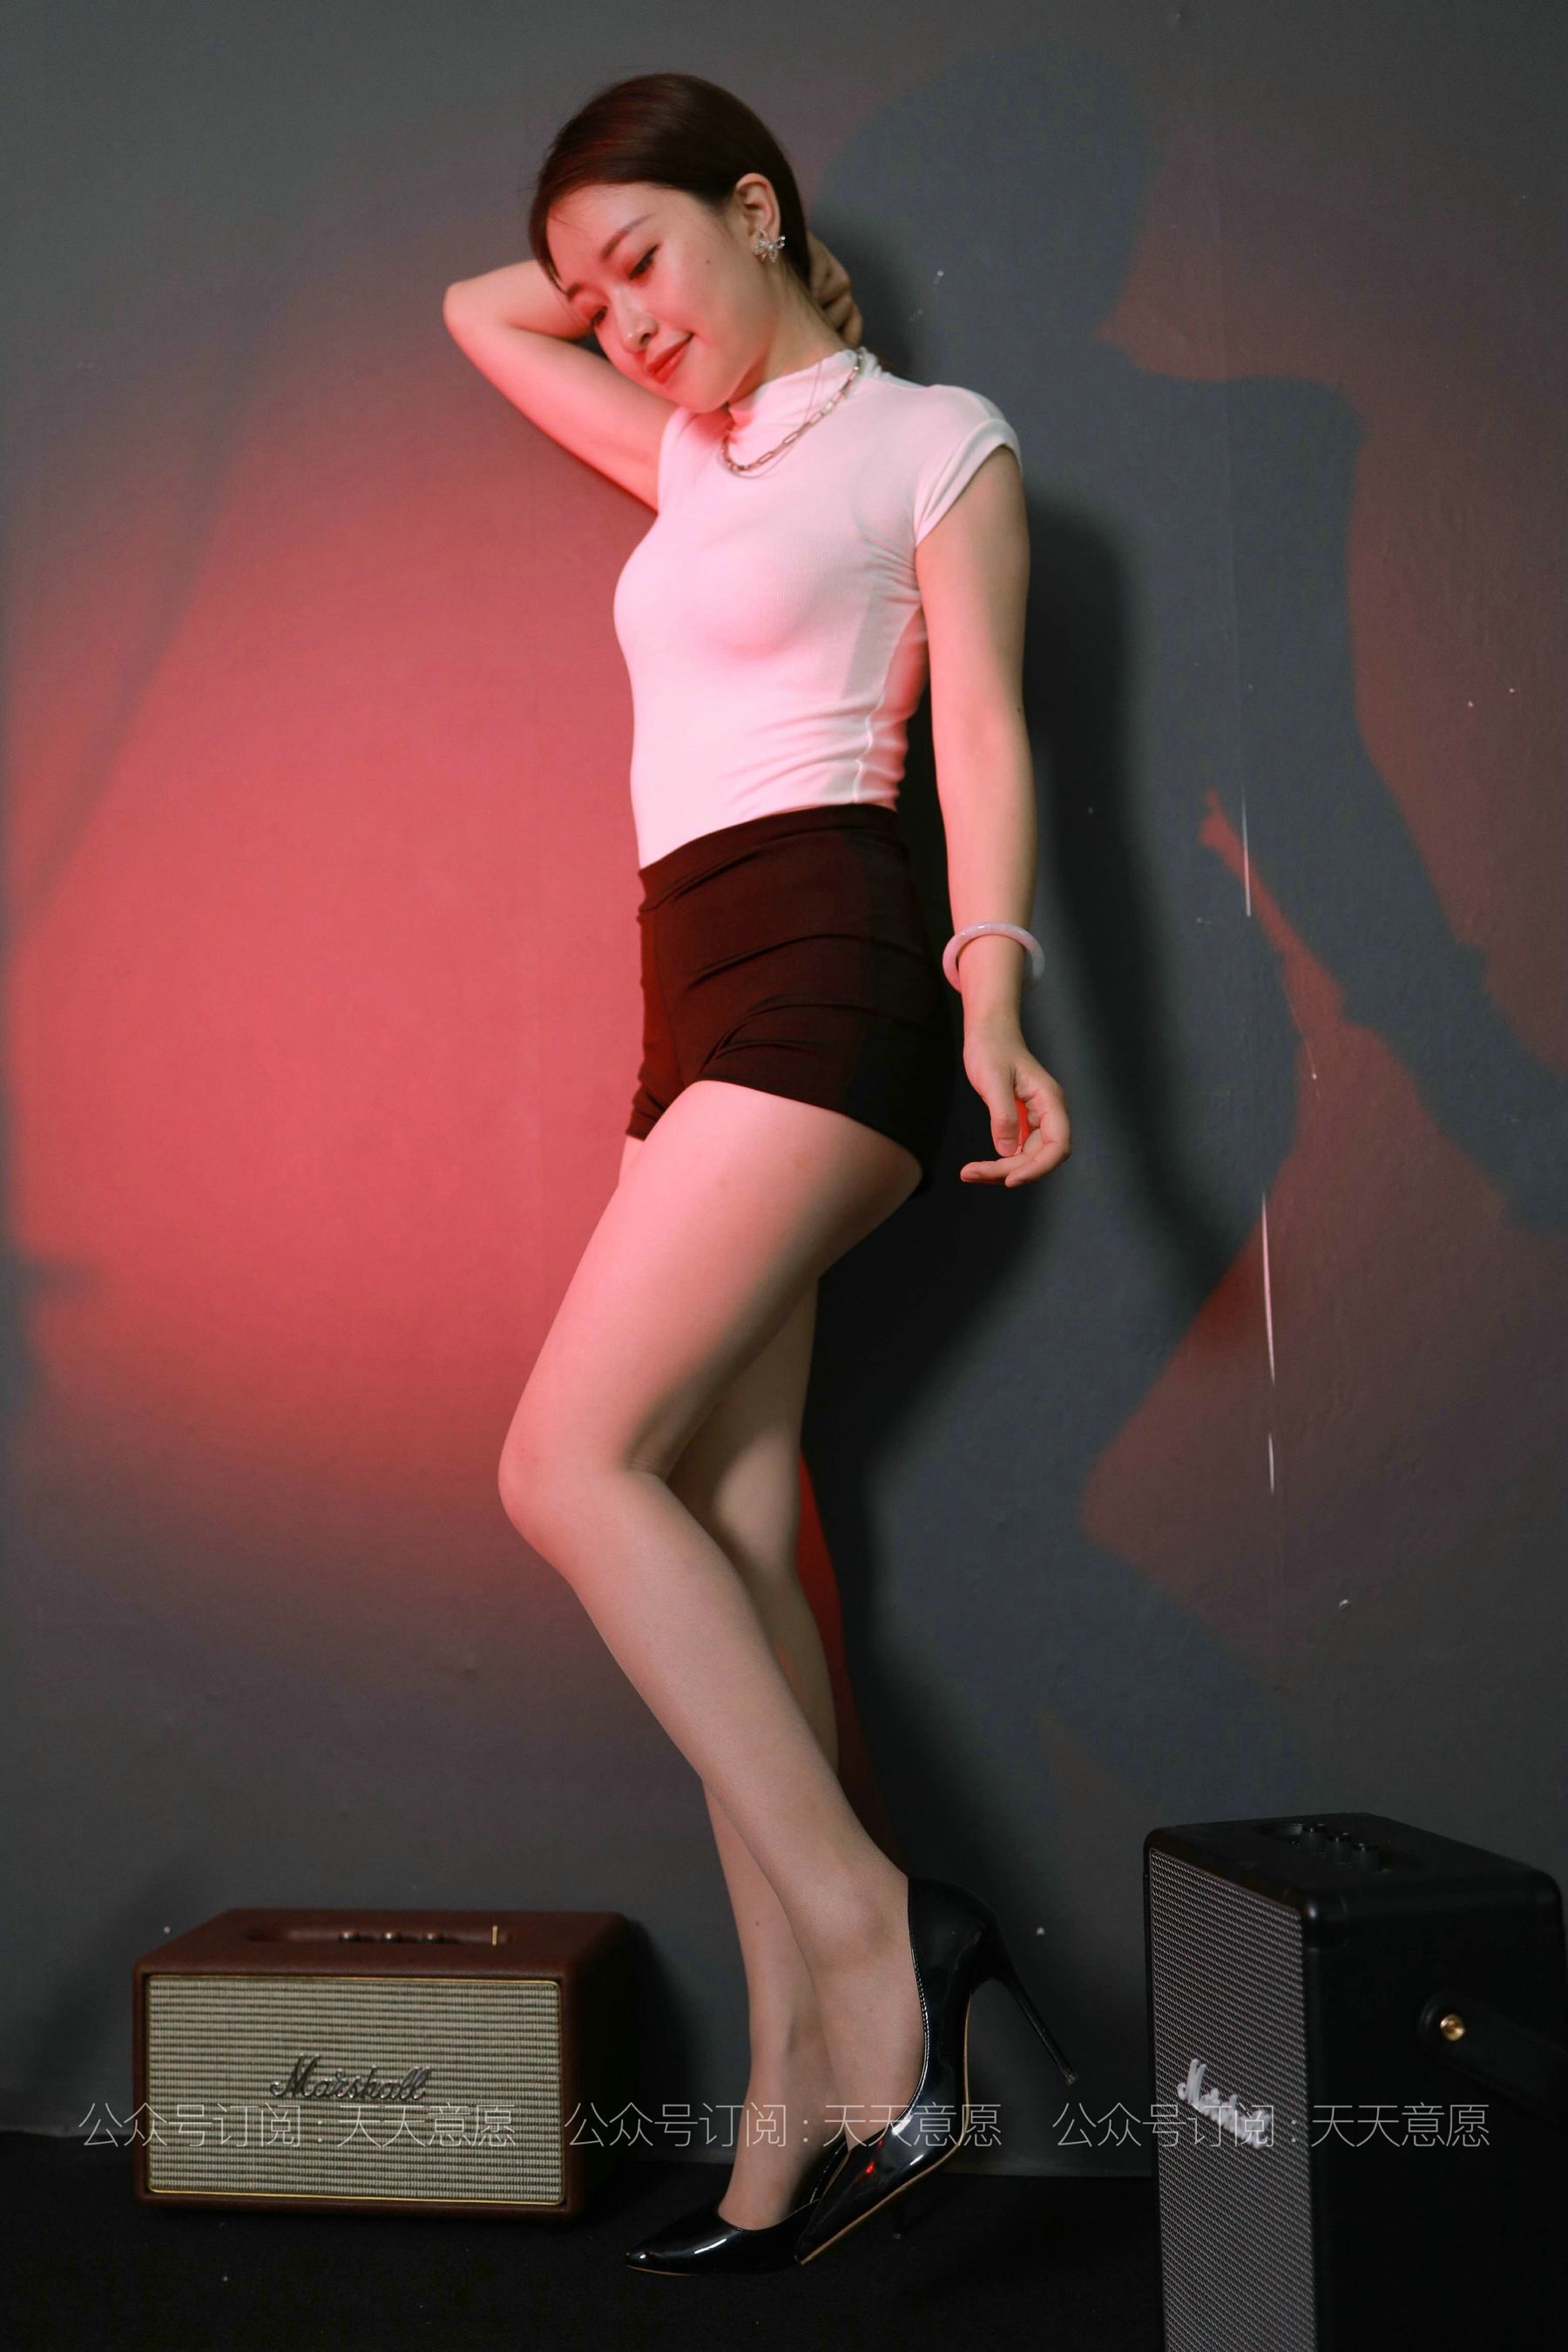 [IESS 奇思趣向] Model: Xiaojie "Pink Girl" Page 94 No.c5246f